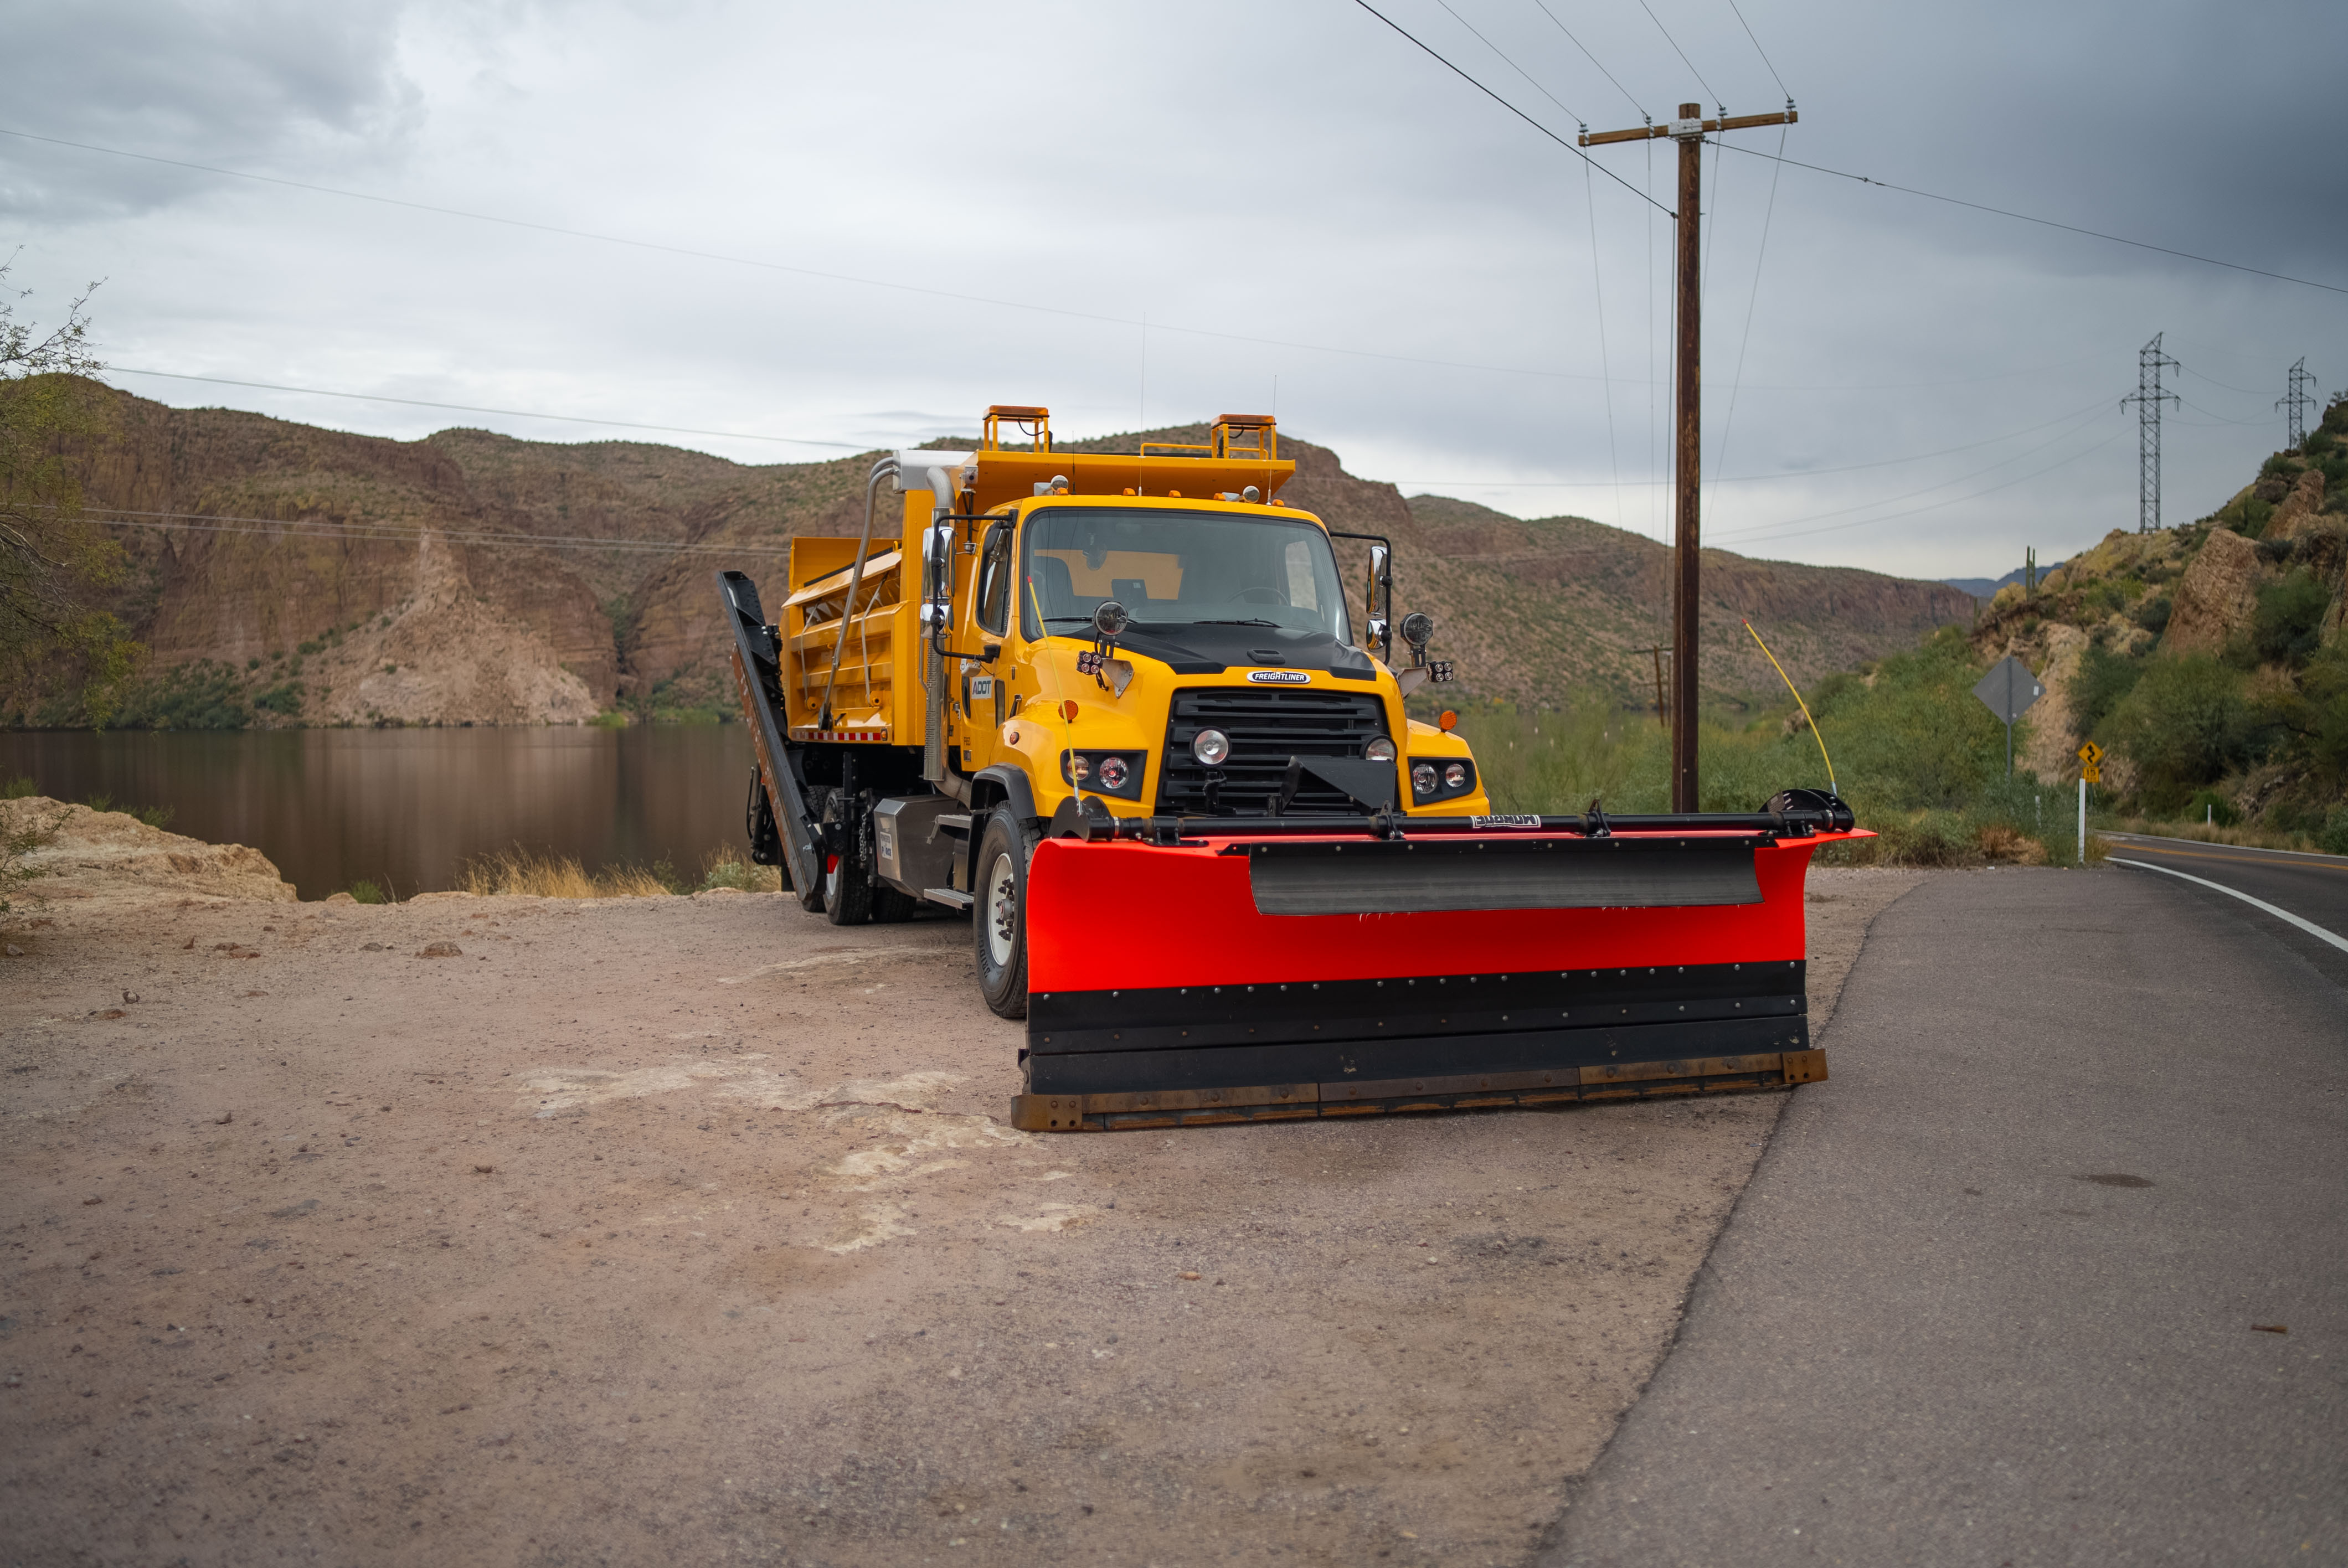 A snowplow parked in front of a lake and mountains.